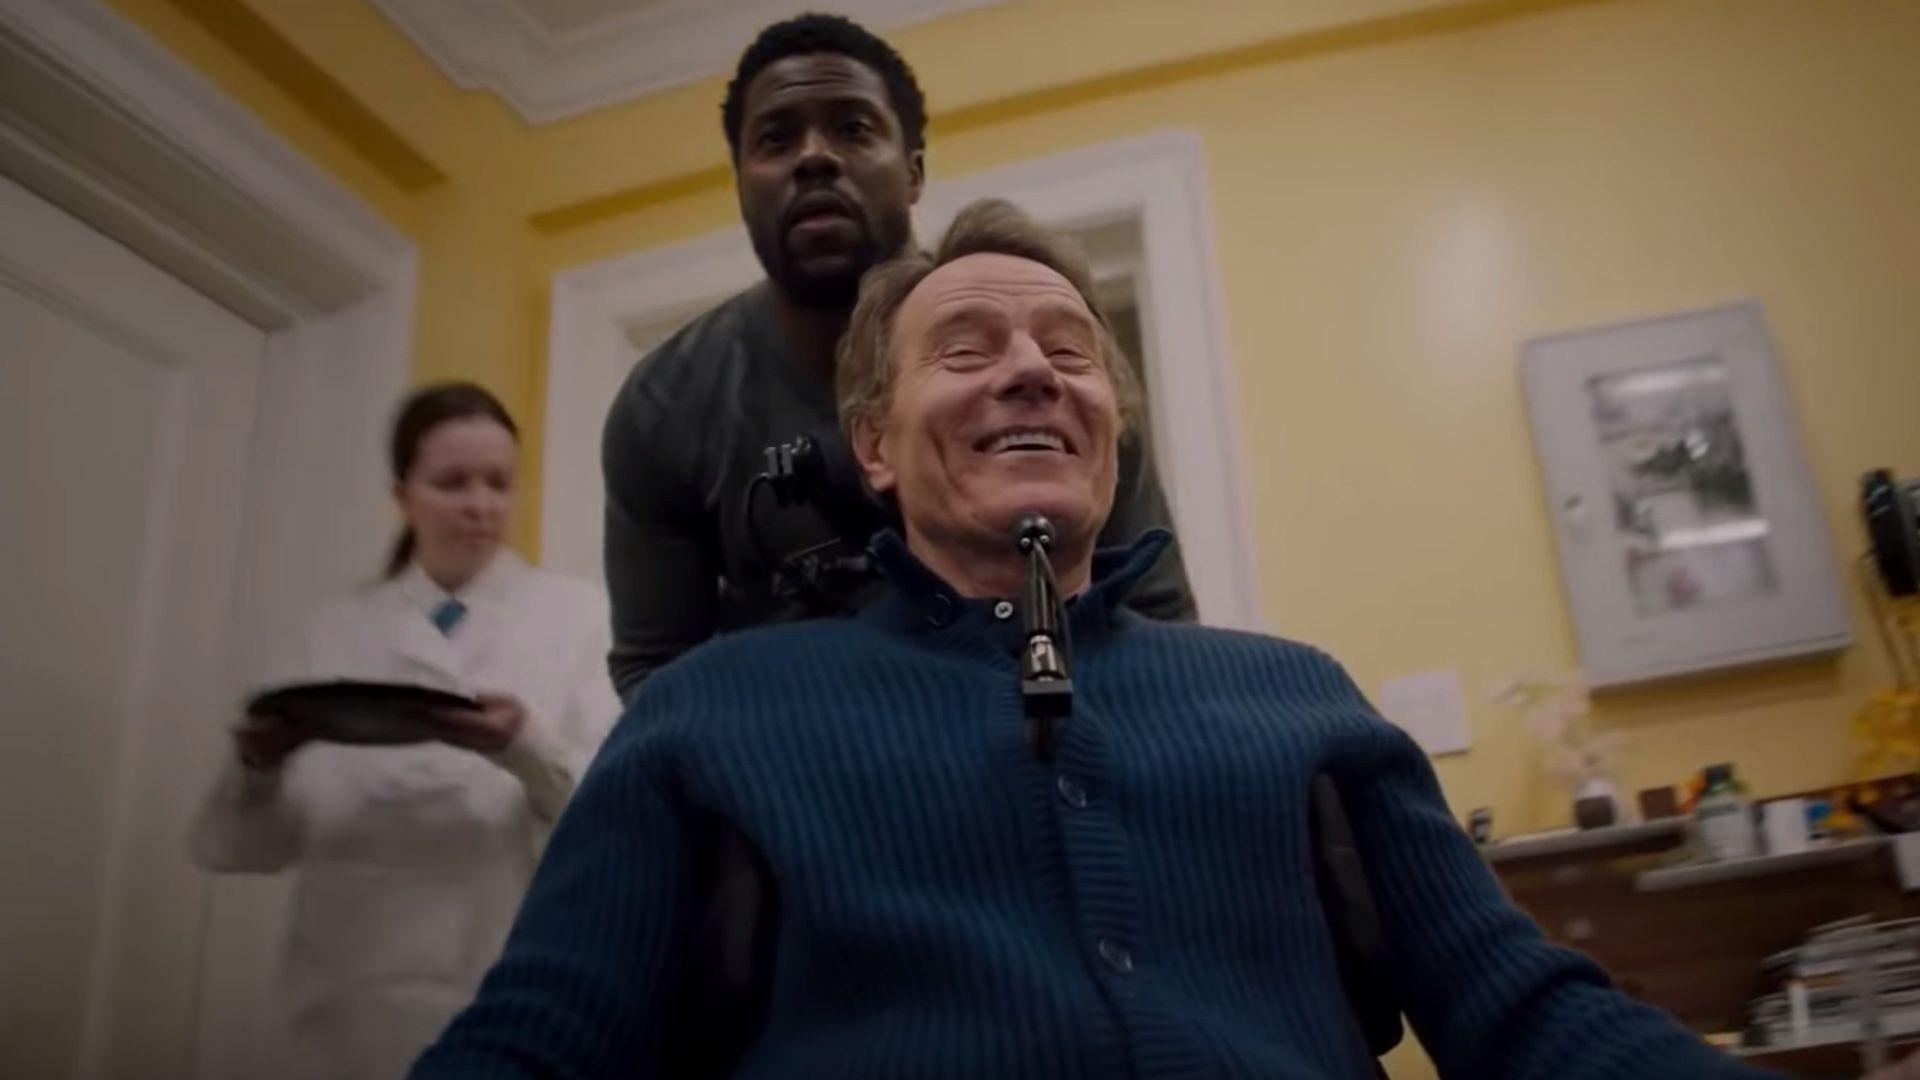 Kevin Hart is Hired To Take Care of Bryan Cranston in Trailer